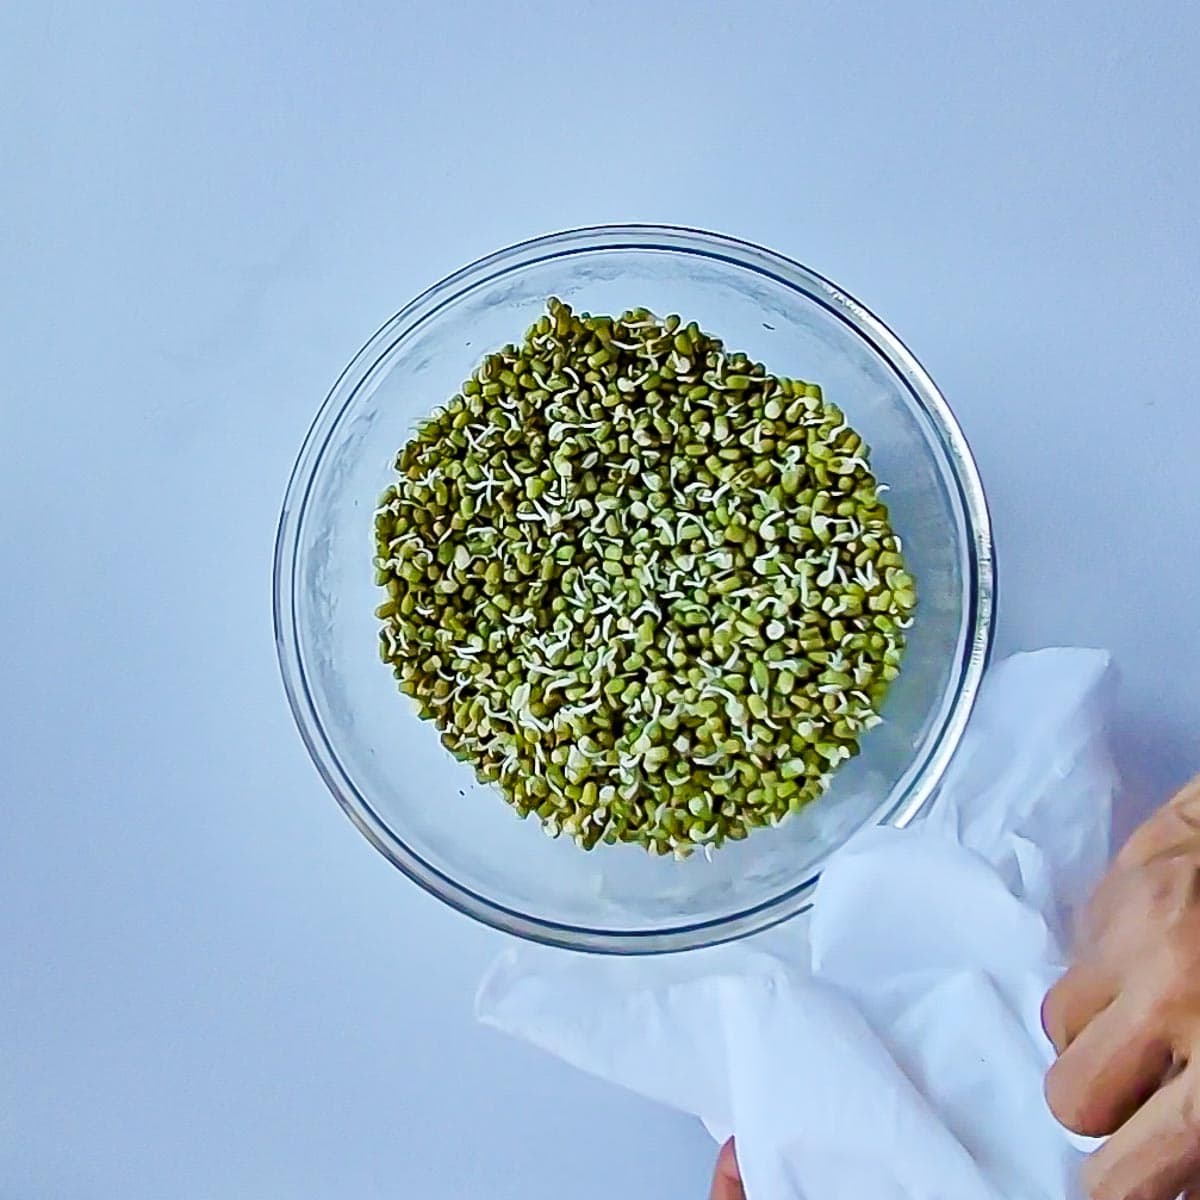 Sprouted moong beans in a glass bowl.